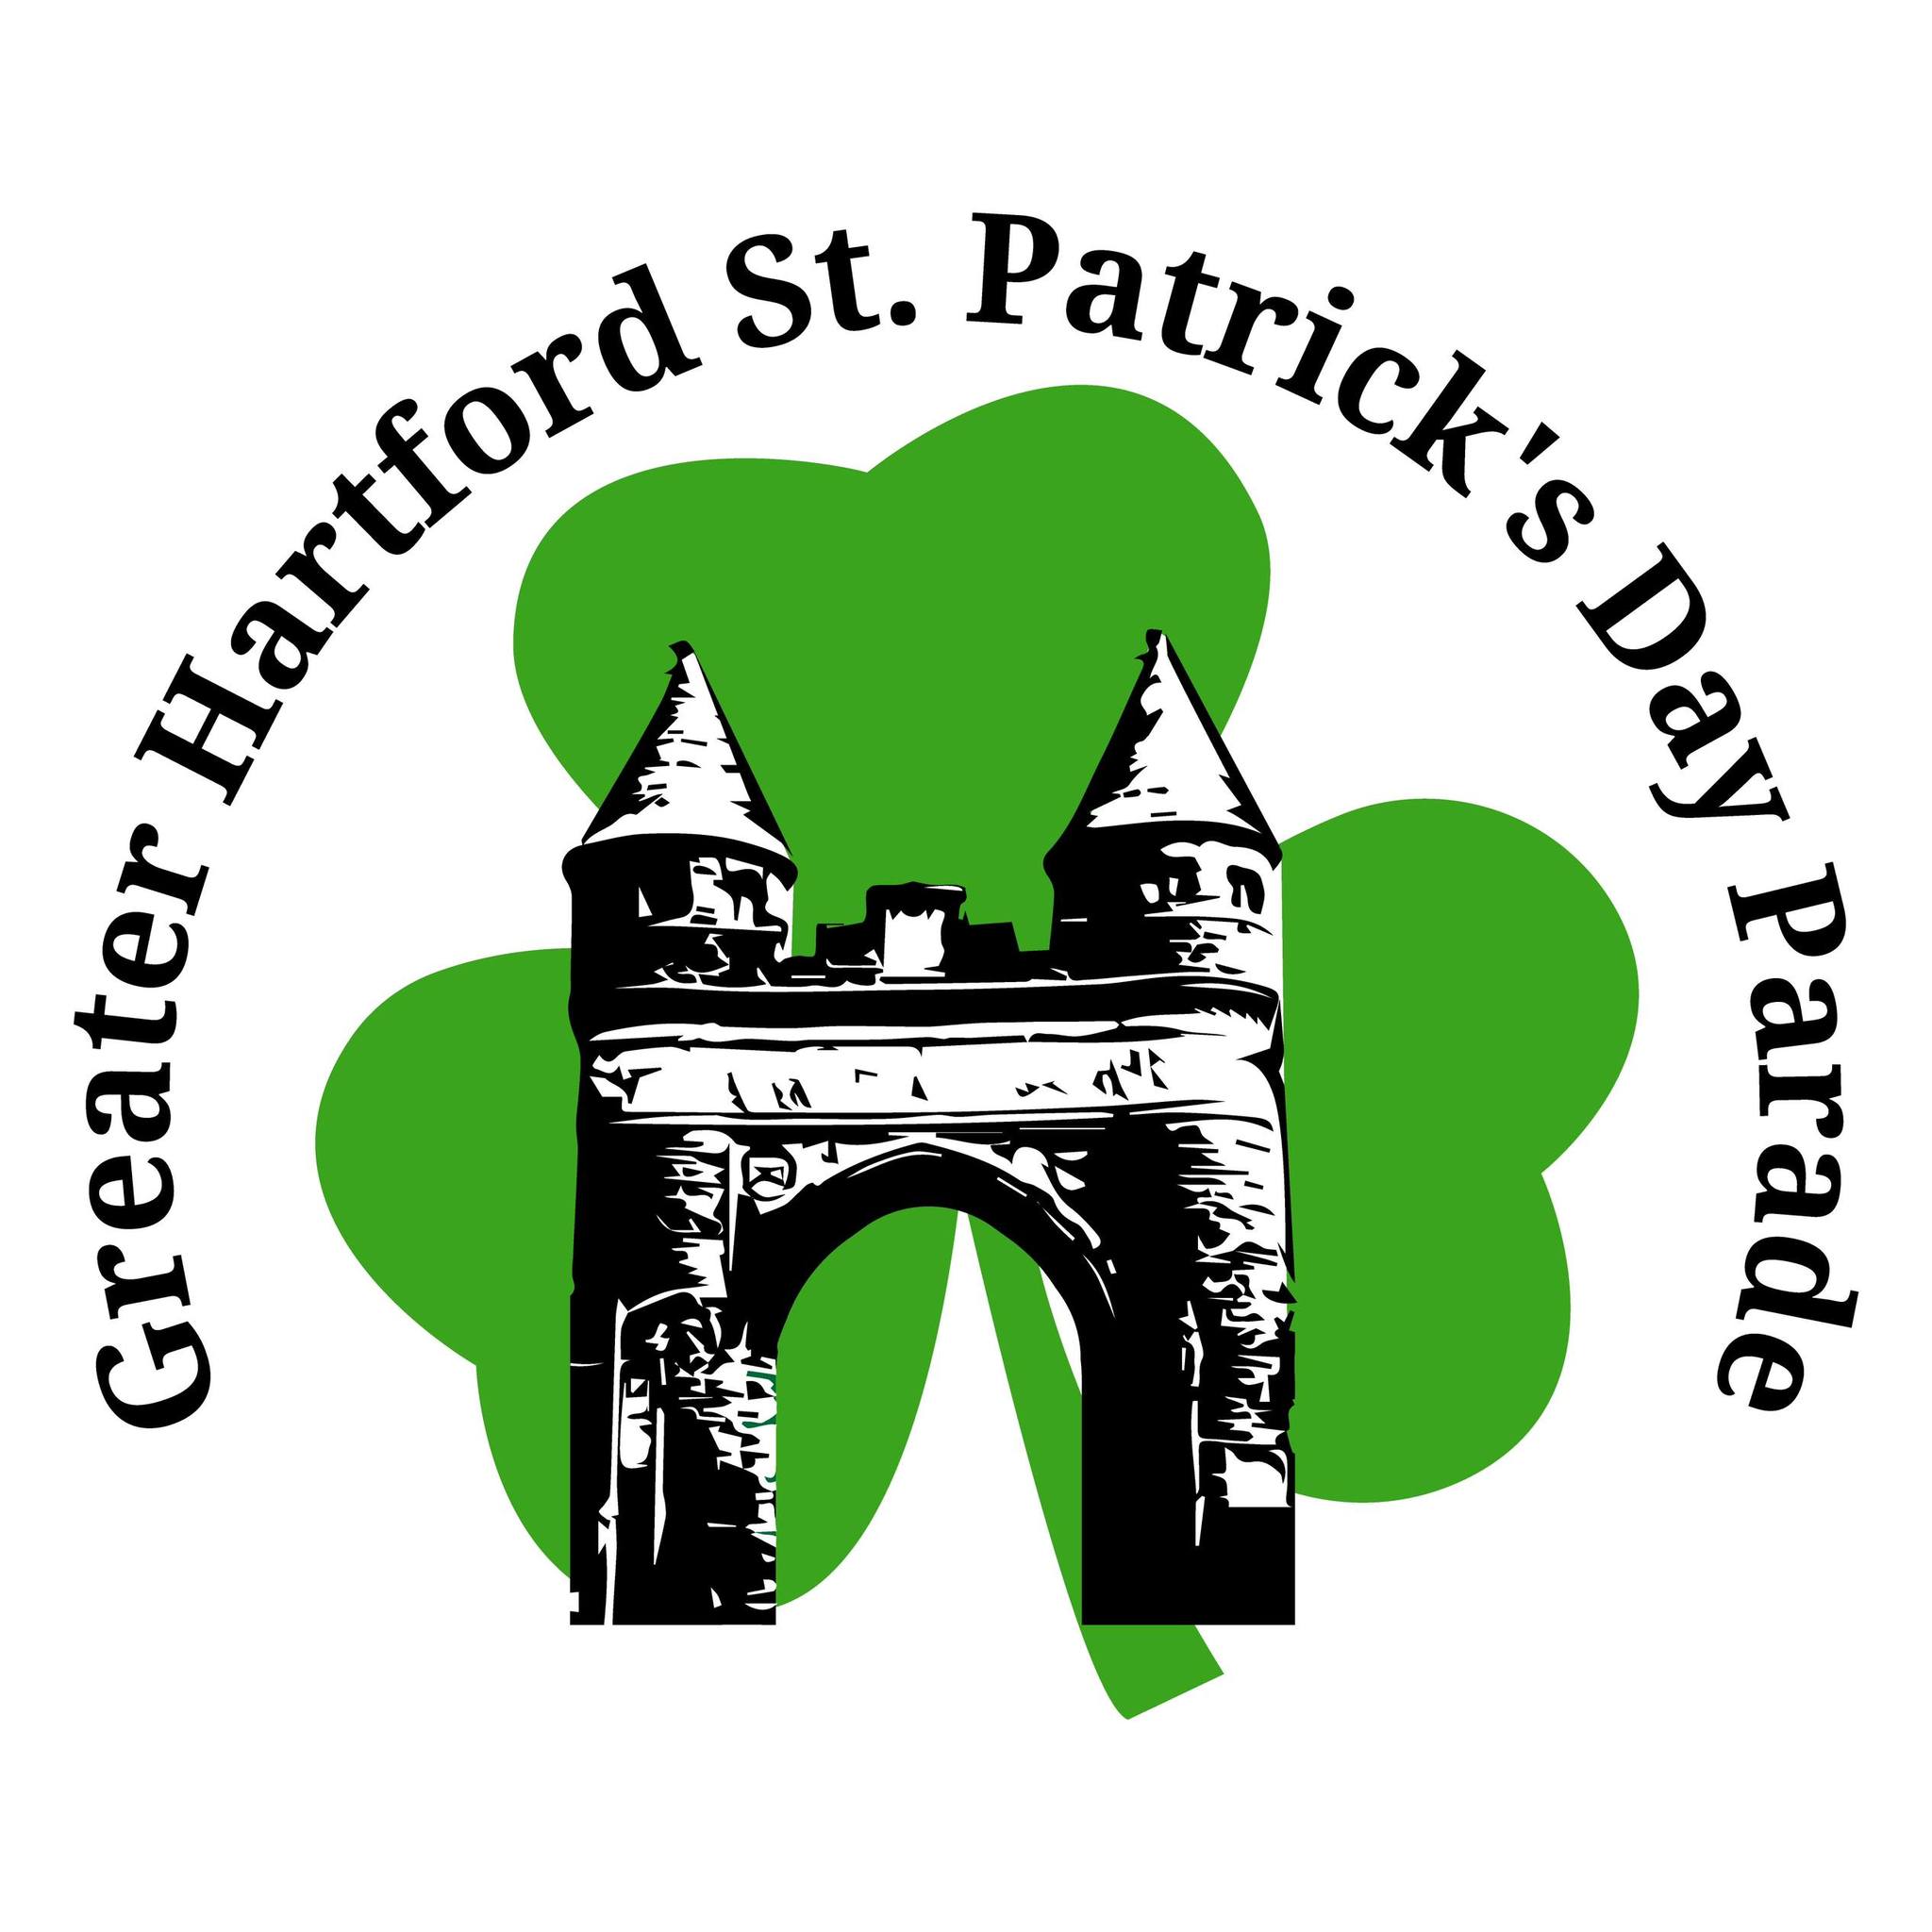 Annual Greater Hartford St. Patrick's Day Parade